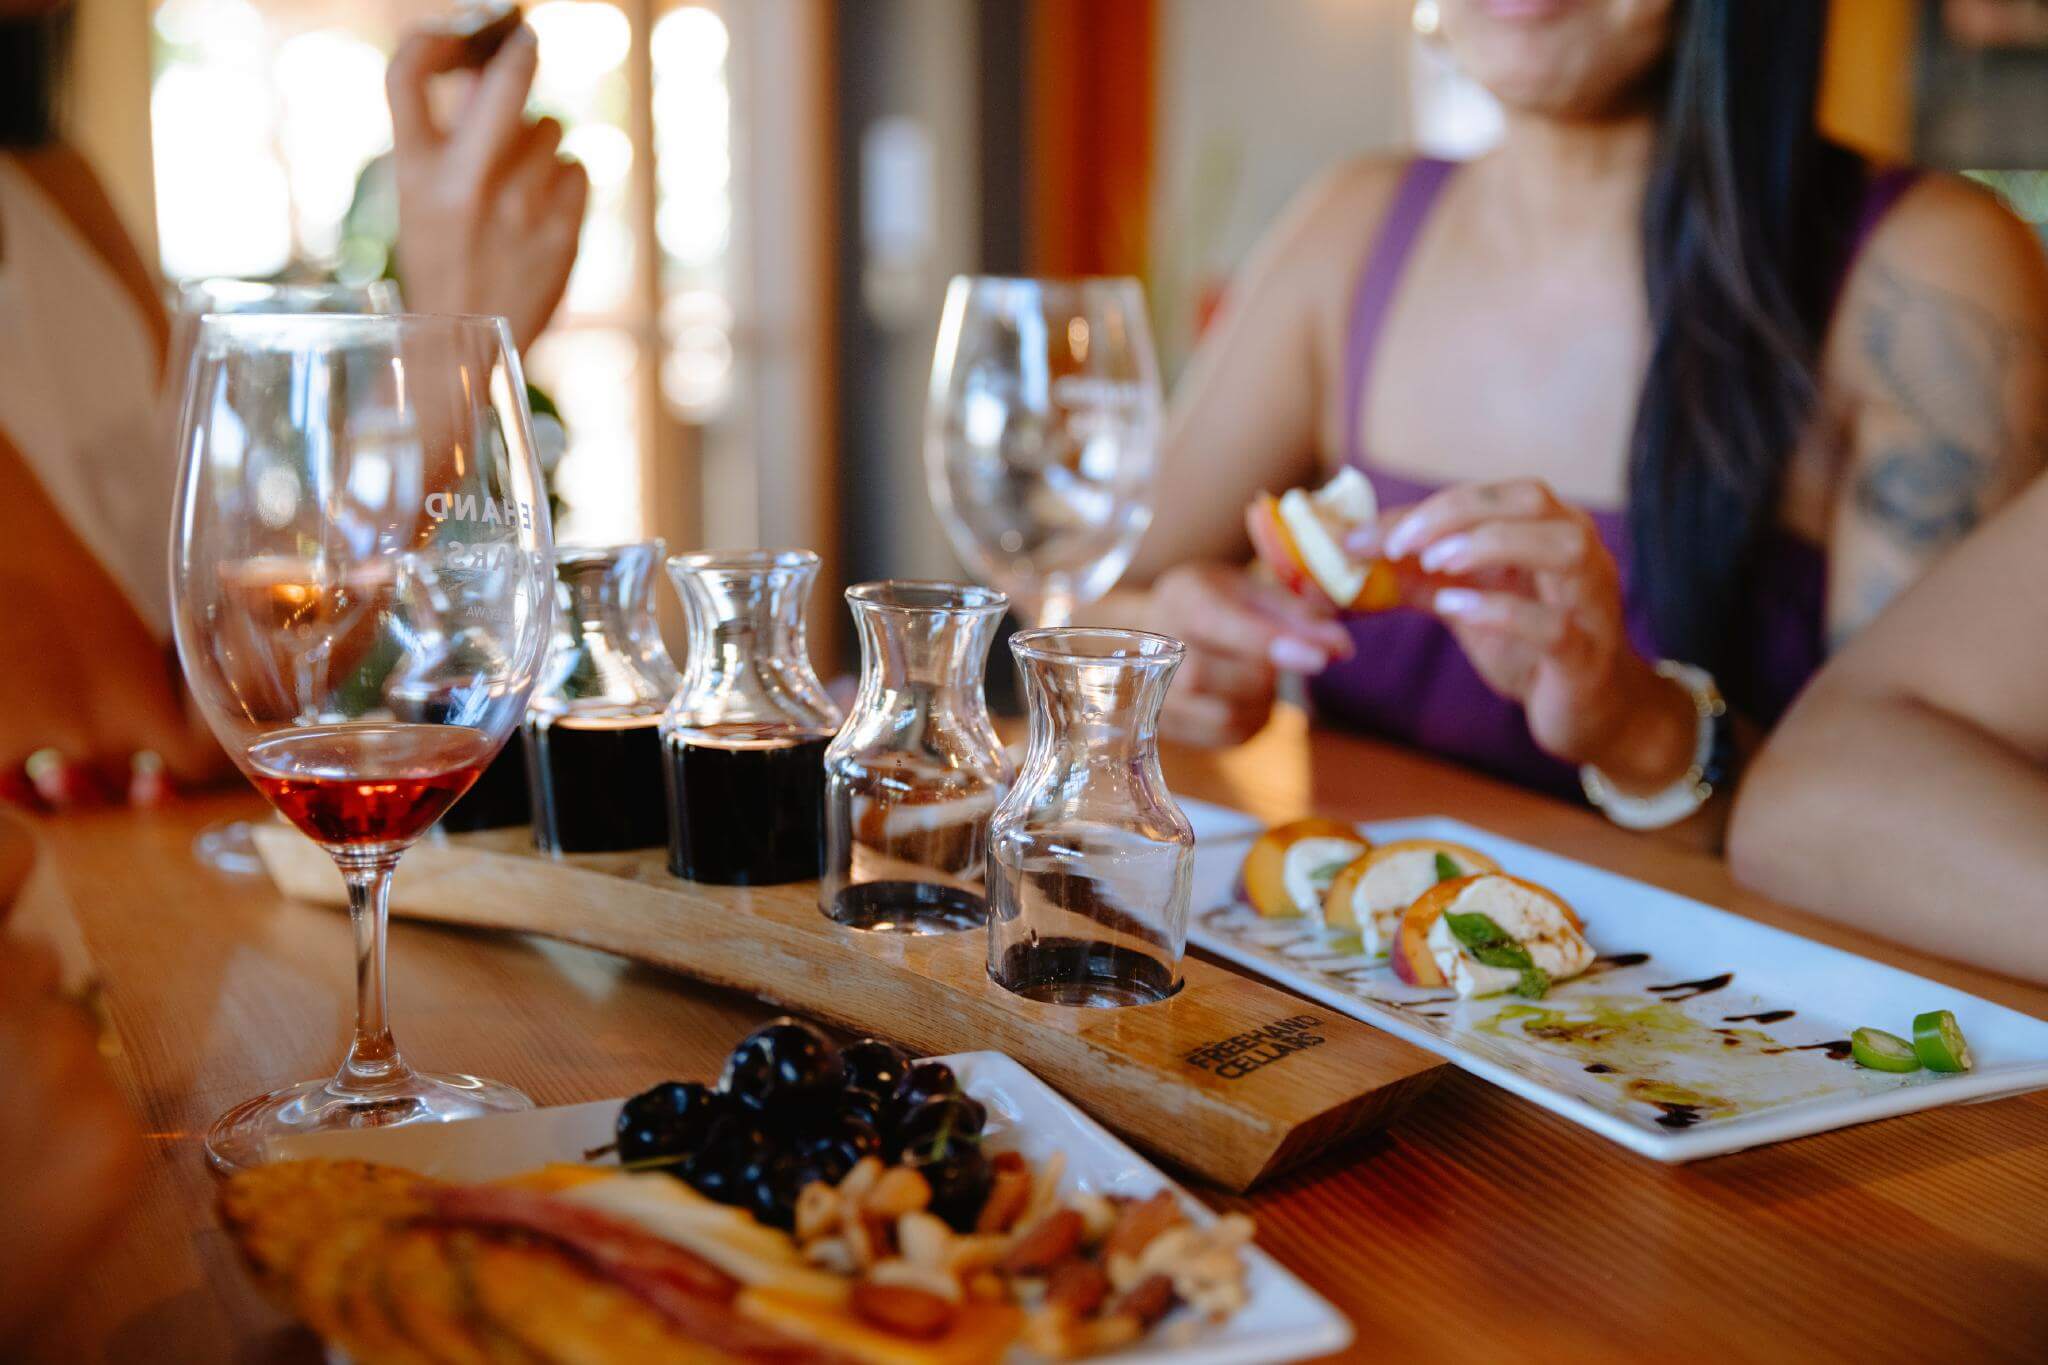 Guests dining and tasting wine at Freehand Cellars in Wapato